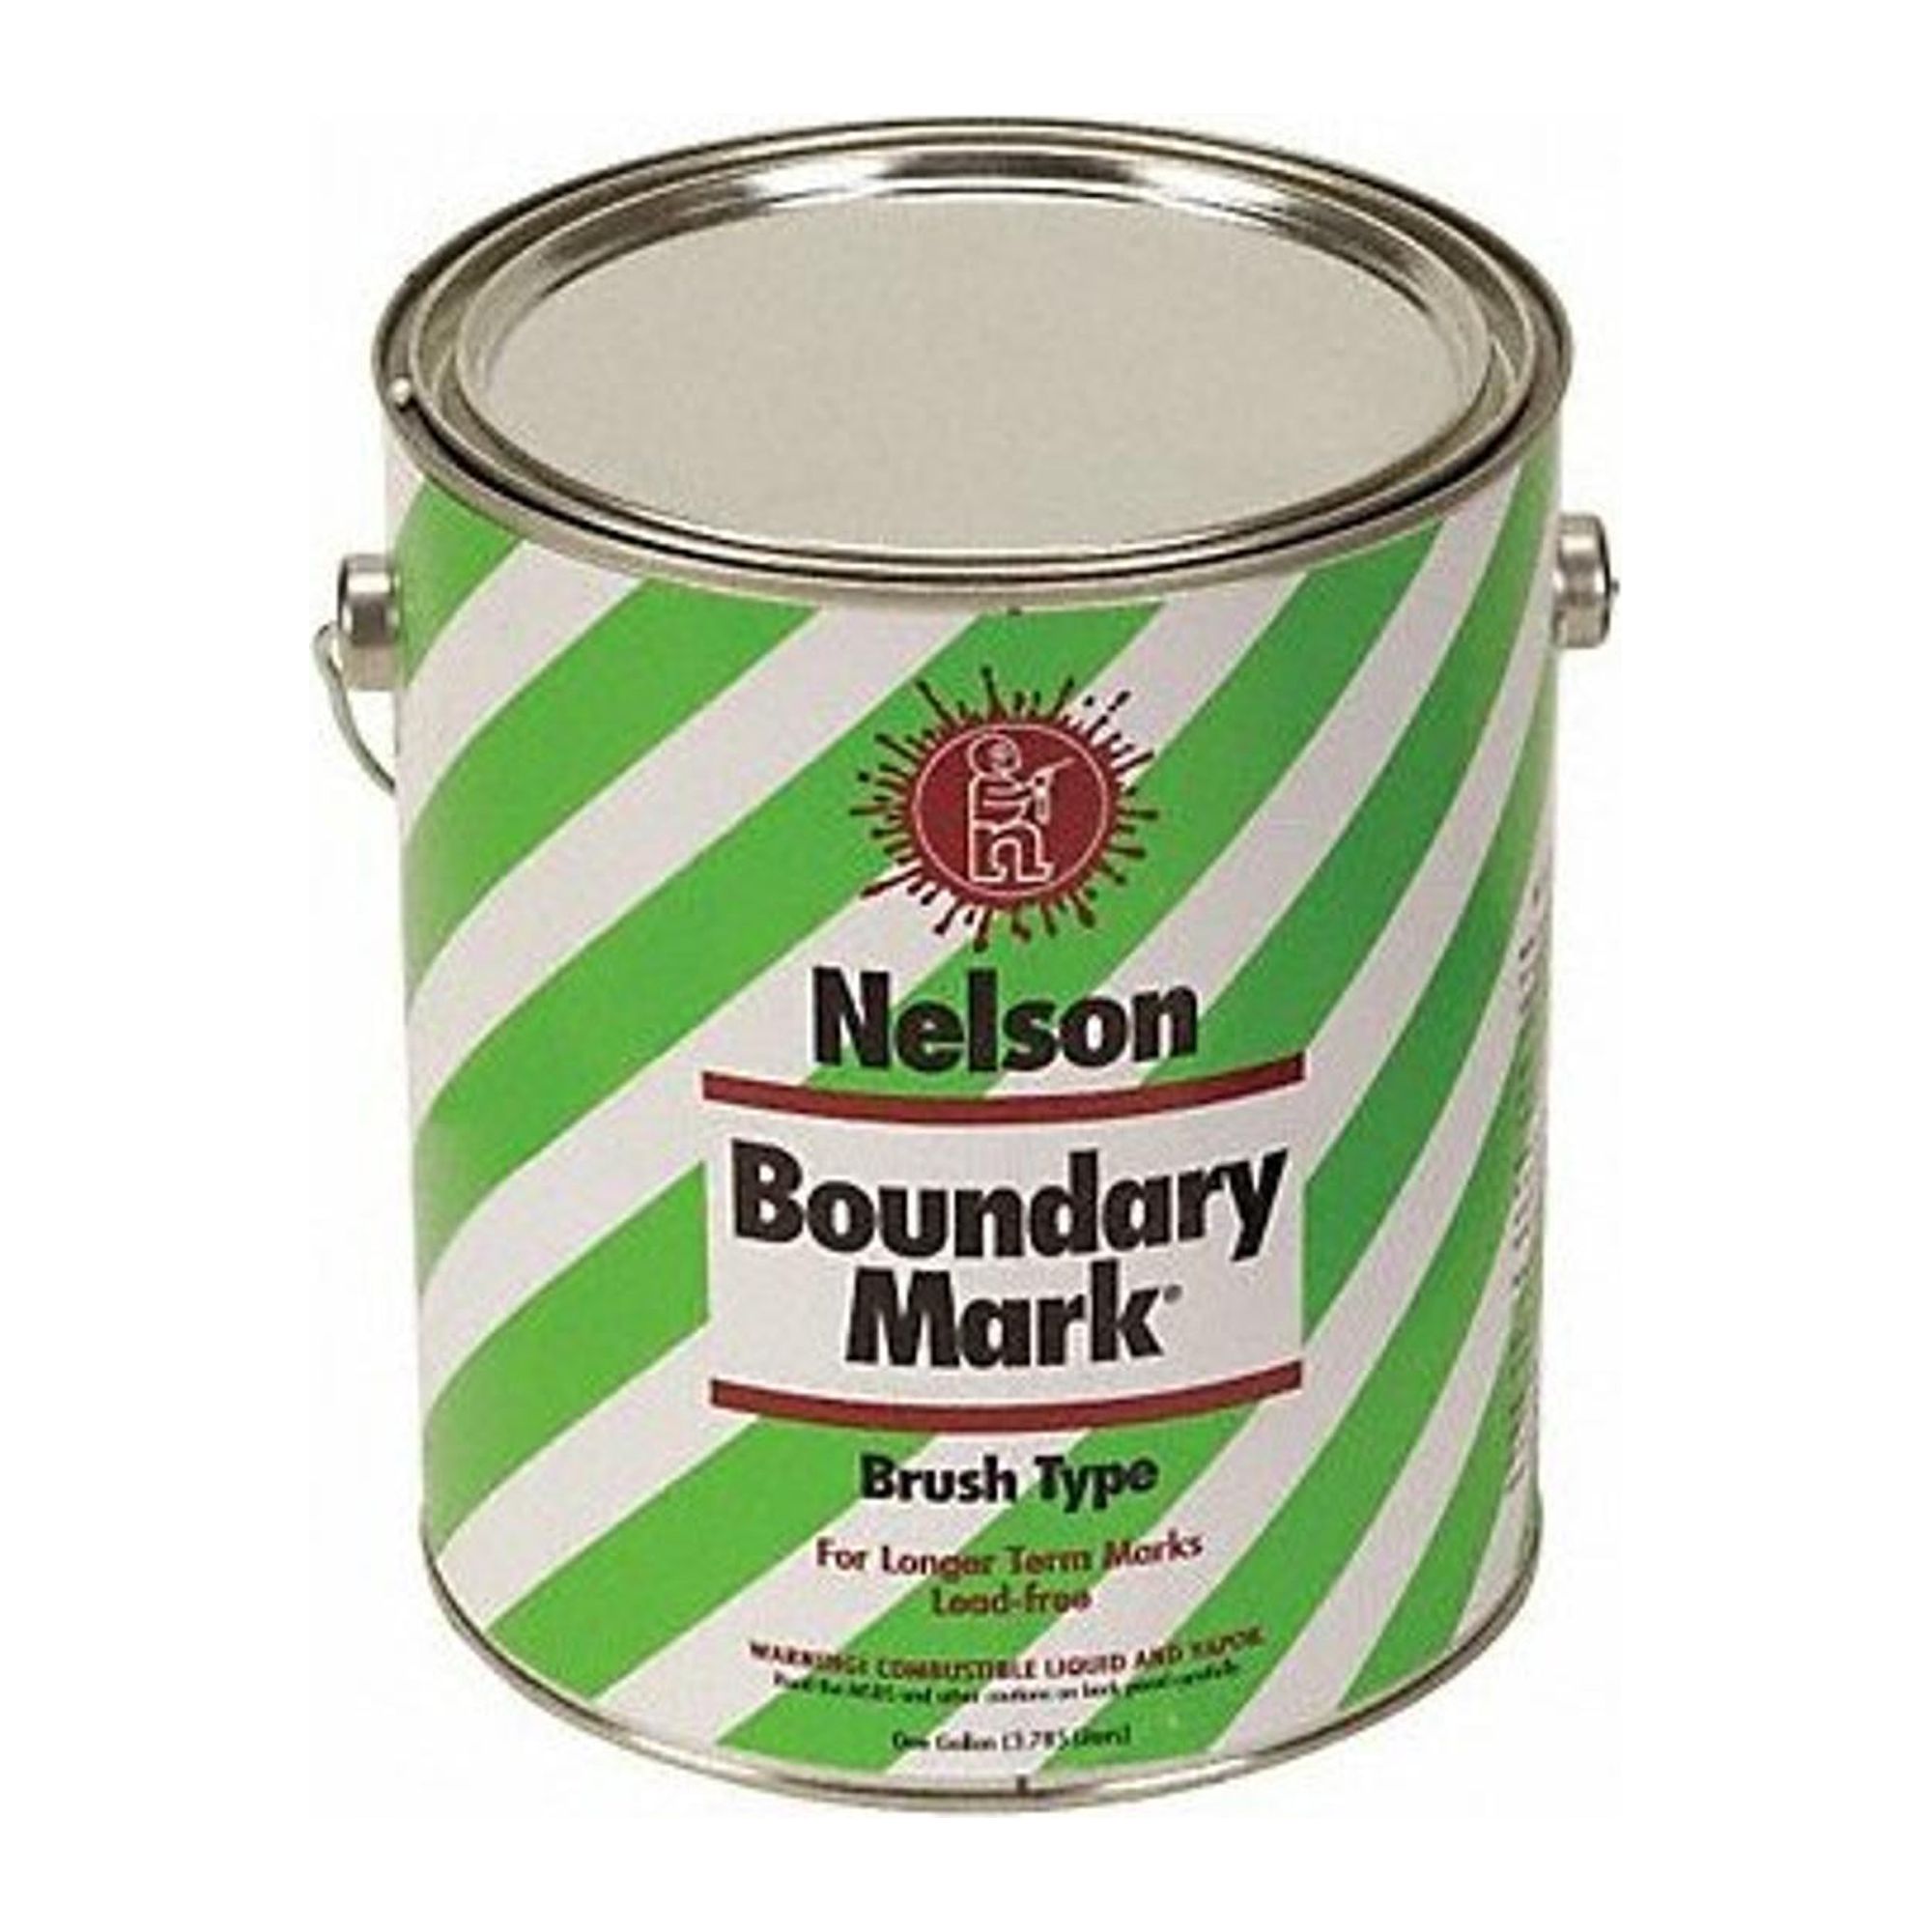 Nelson Paint Boundary Marking Paint,1 gal,Green  29 19 GL GREEN - image 1 of 1